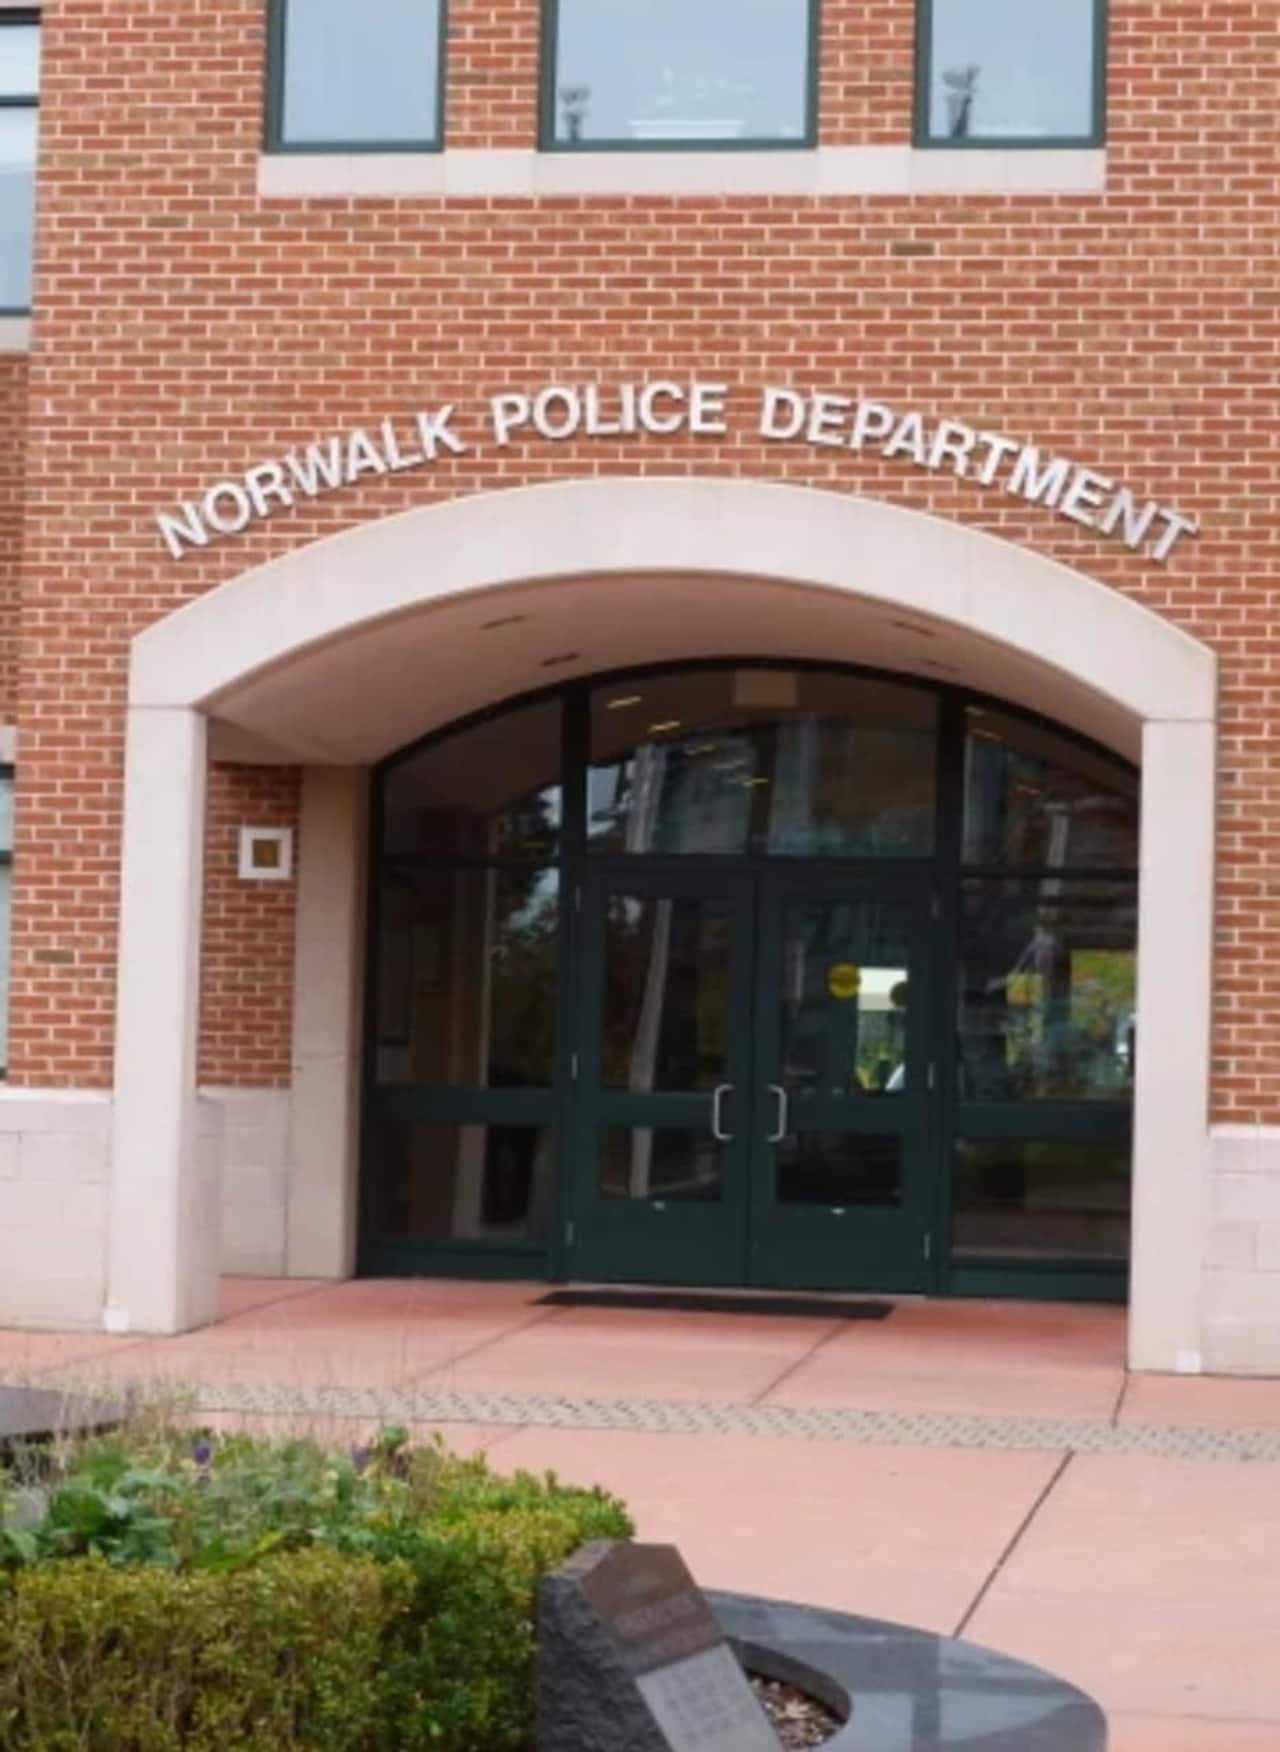 The Norwalk police department arrested a man Wednesday for trying to steal a pair of sneakers from Kohl's.